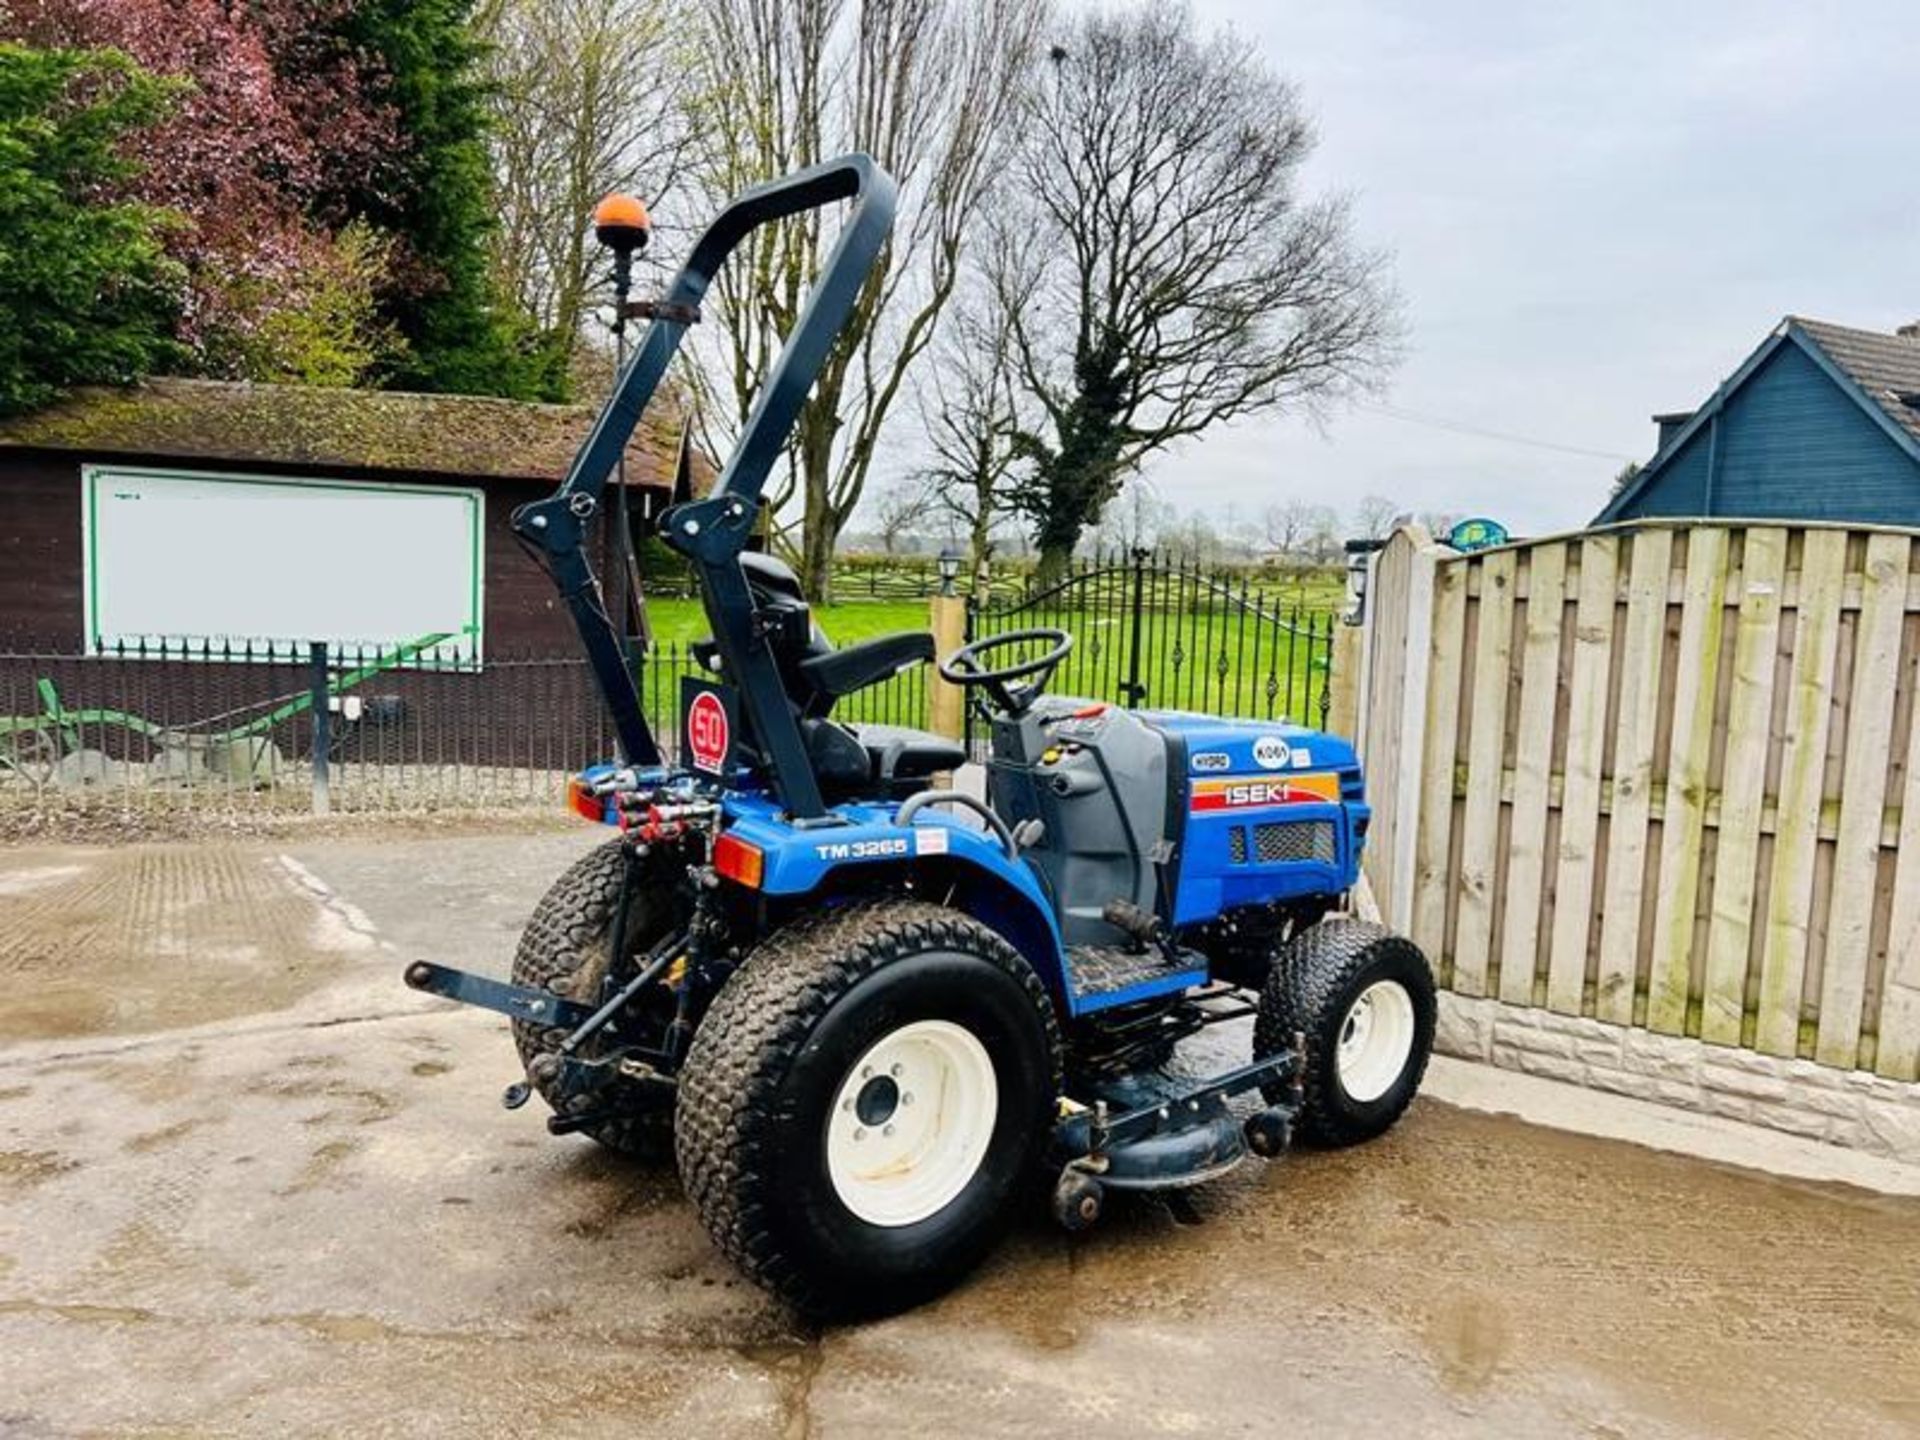 ISEKI TM3265 4WD COMPACT TRACTOR *446 HOURS* C/W MOWER DECK & ROLE BAR - Image 12 of 12